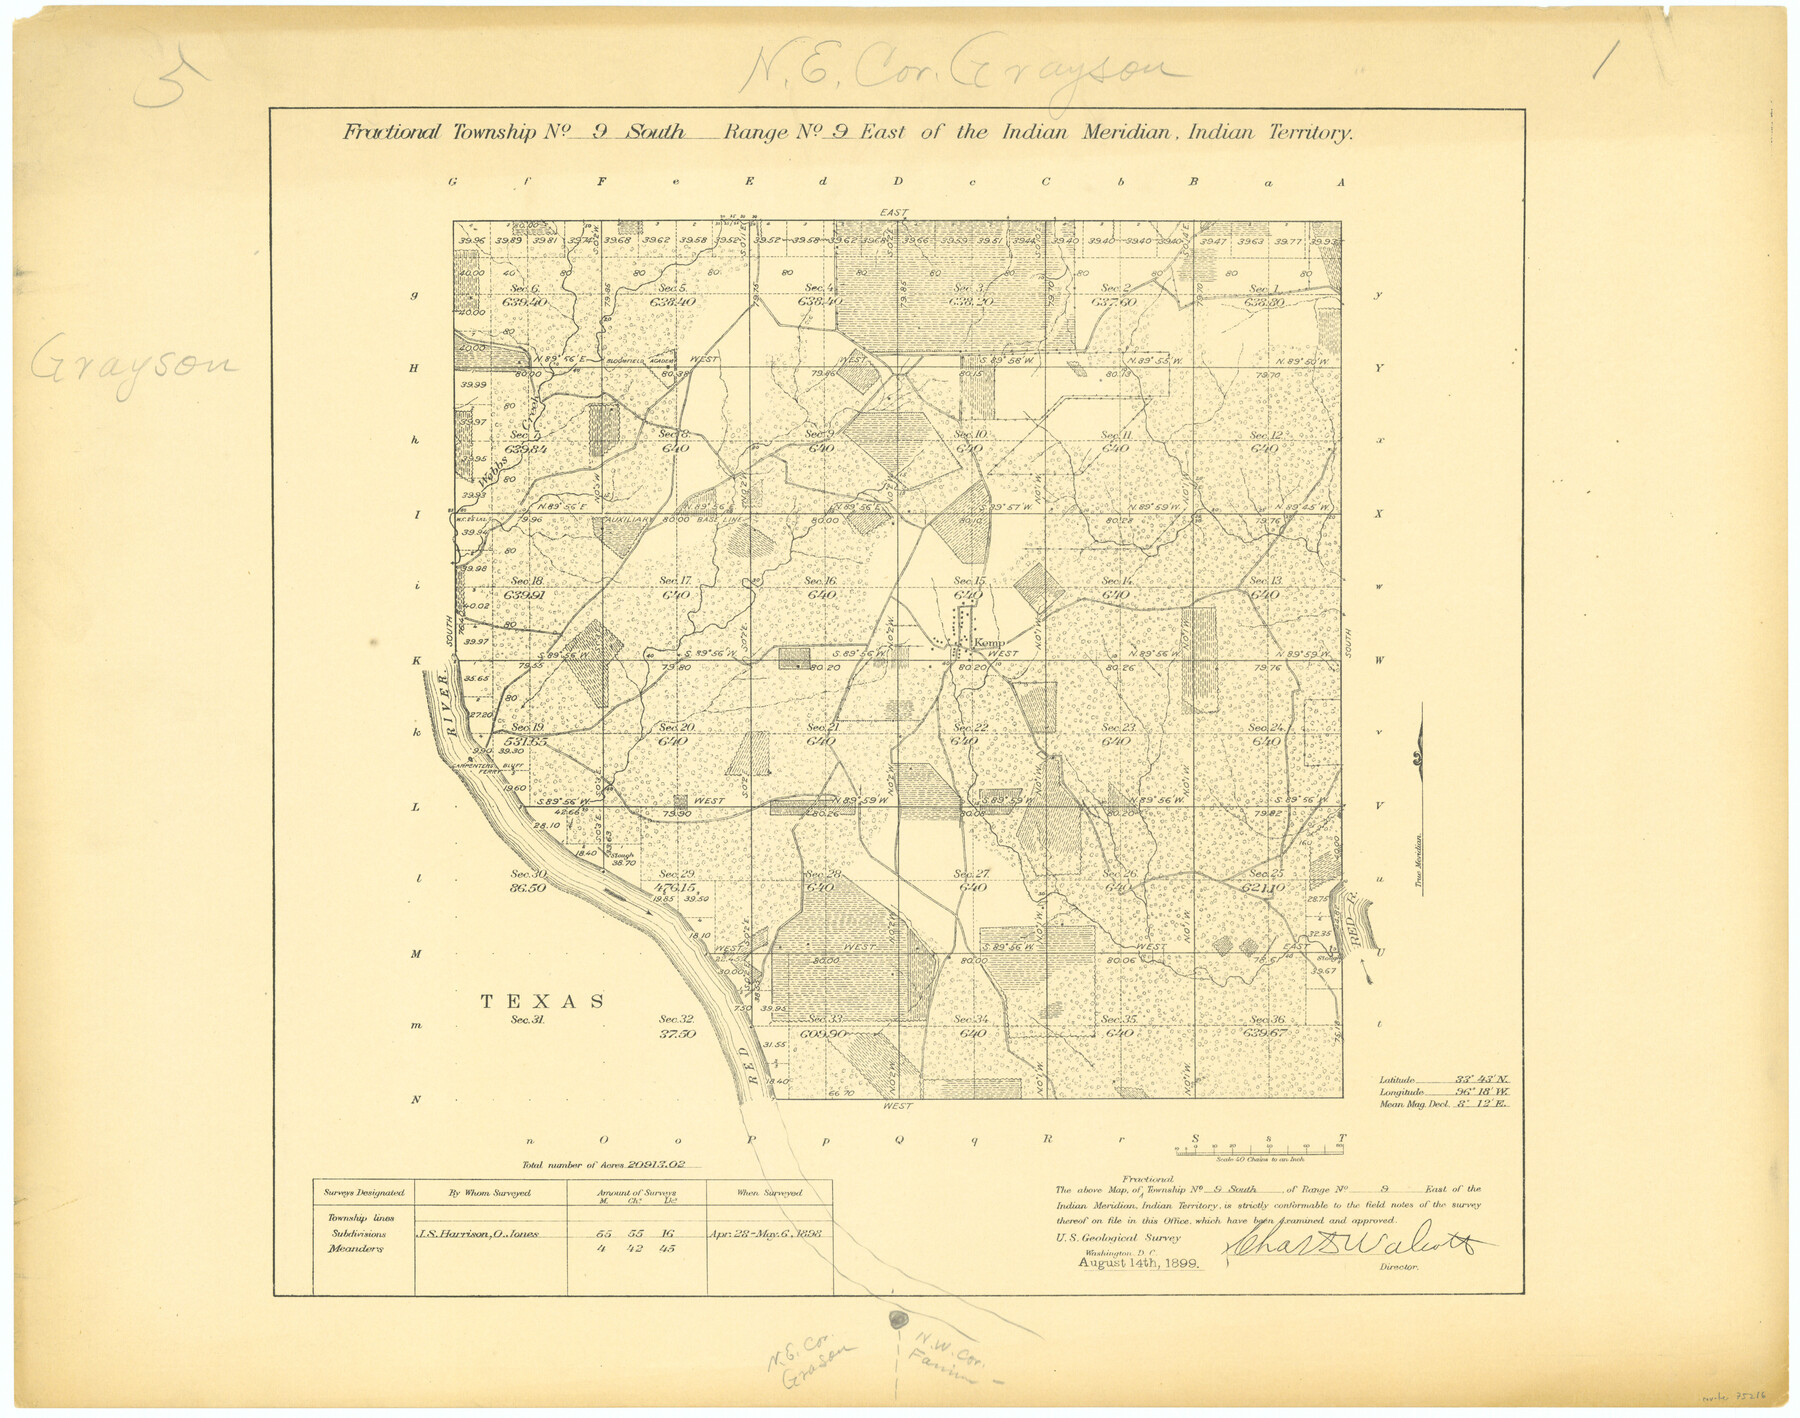 75216, Fractional Township No. 9 South Range No. 9 East of the Indian Meridian, Indian Territory, General Map Collection